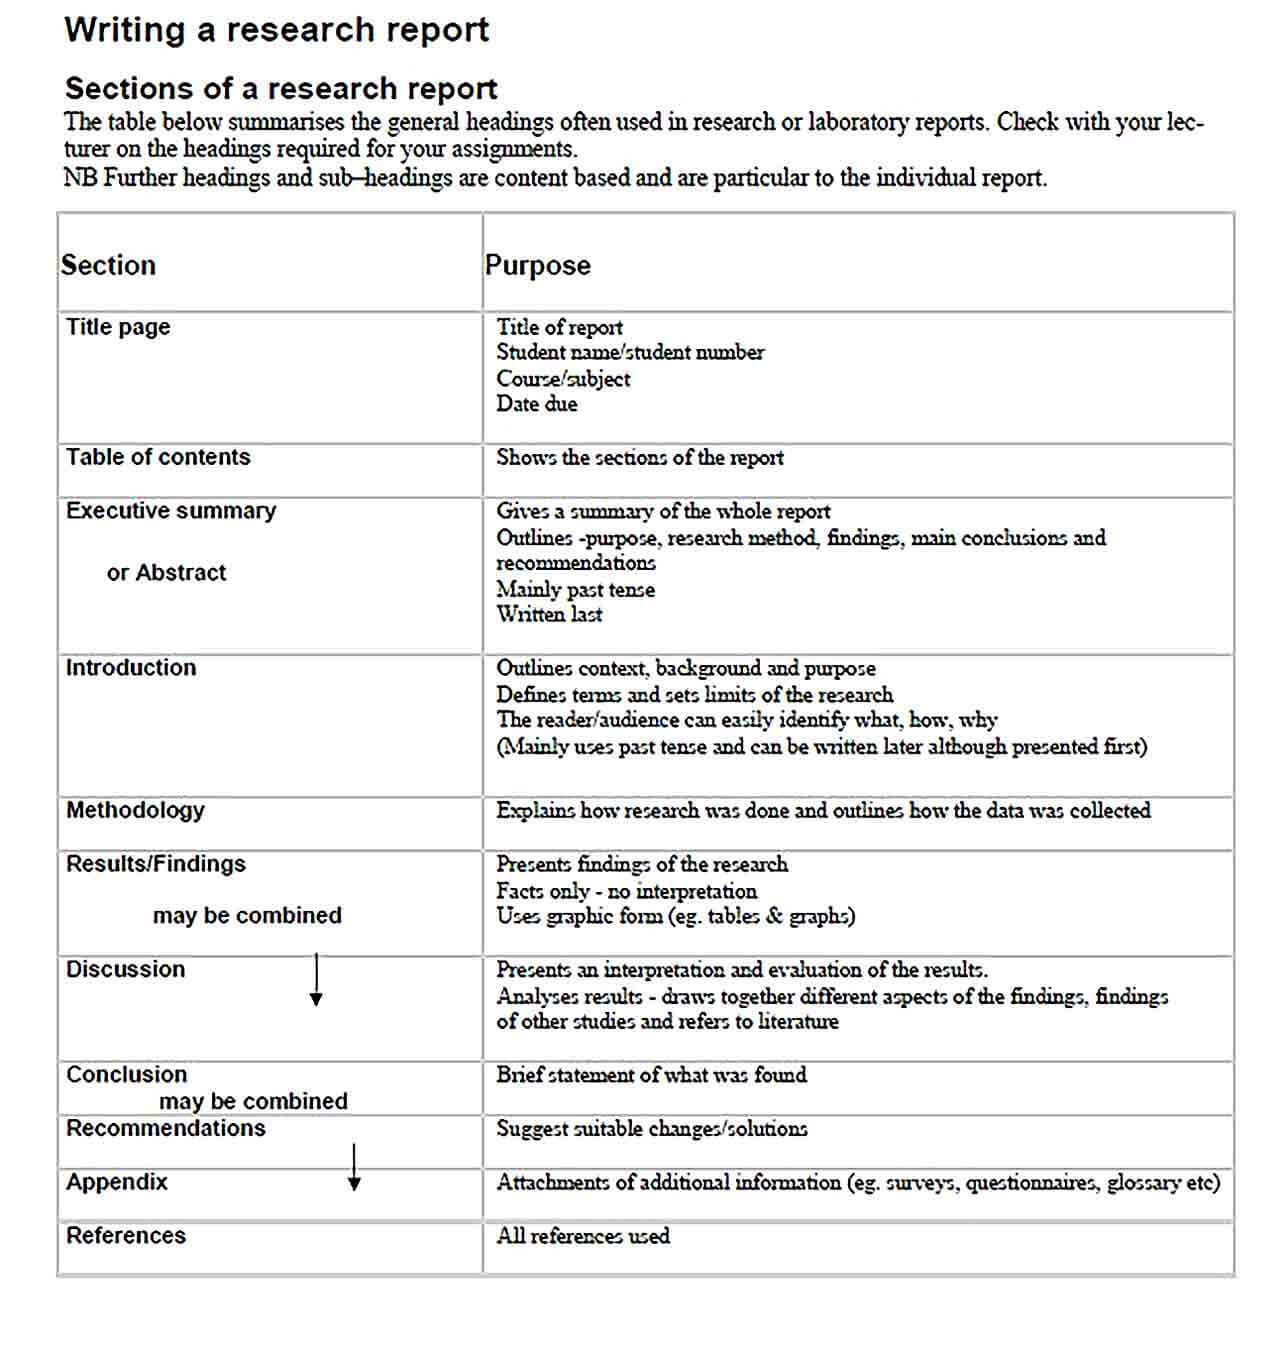 Sample Research Report Layout